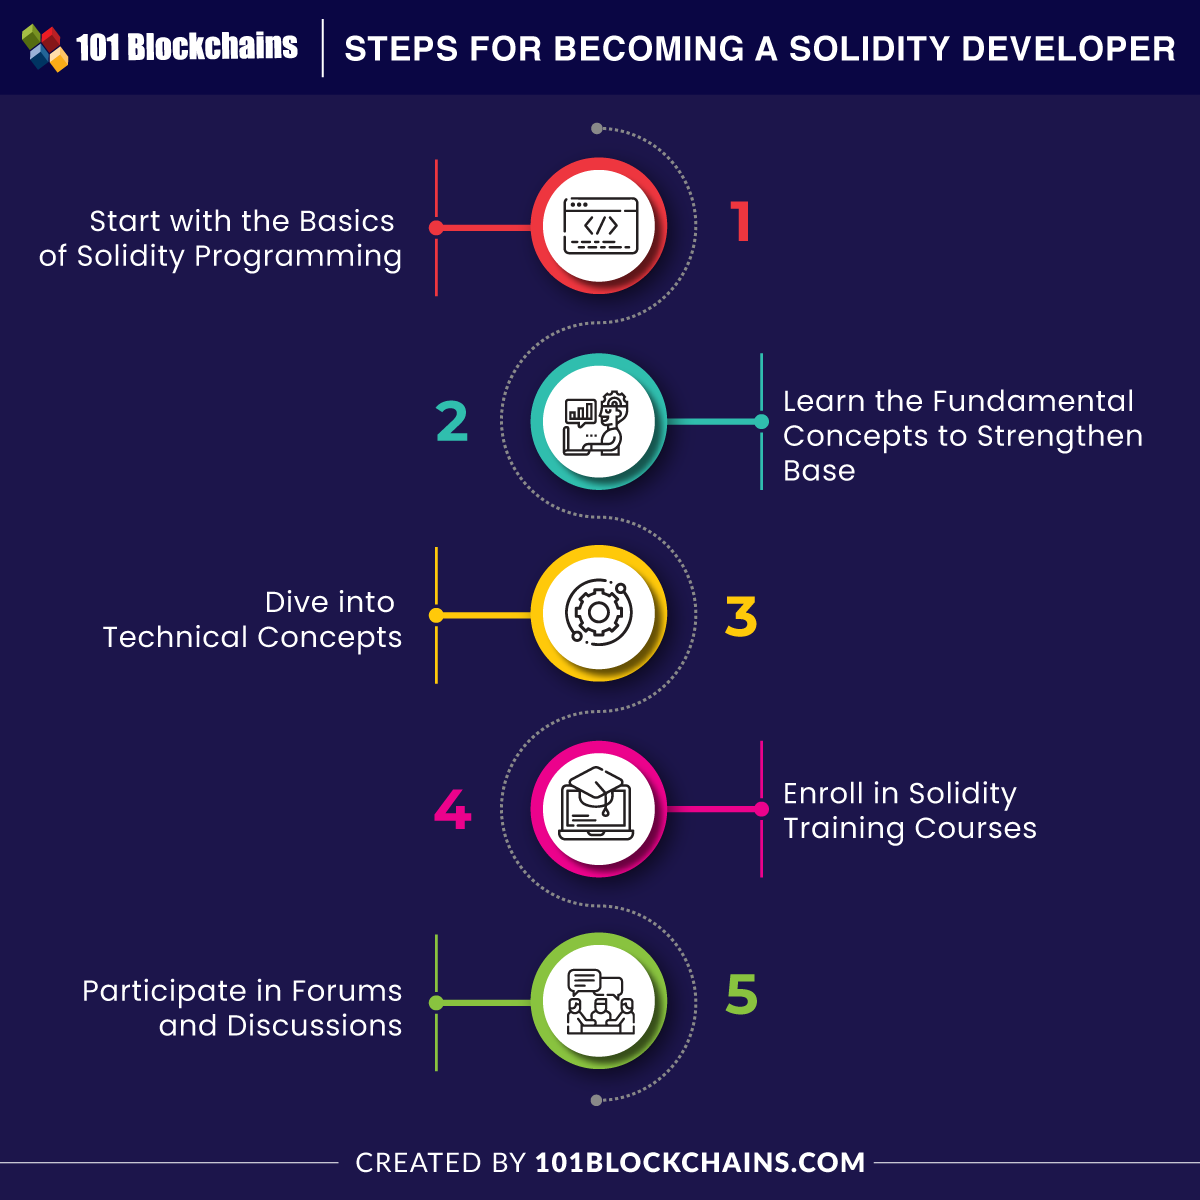 Steps for Becoming a Solidity Developer